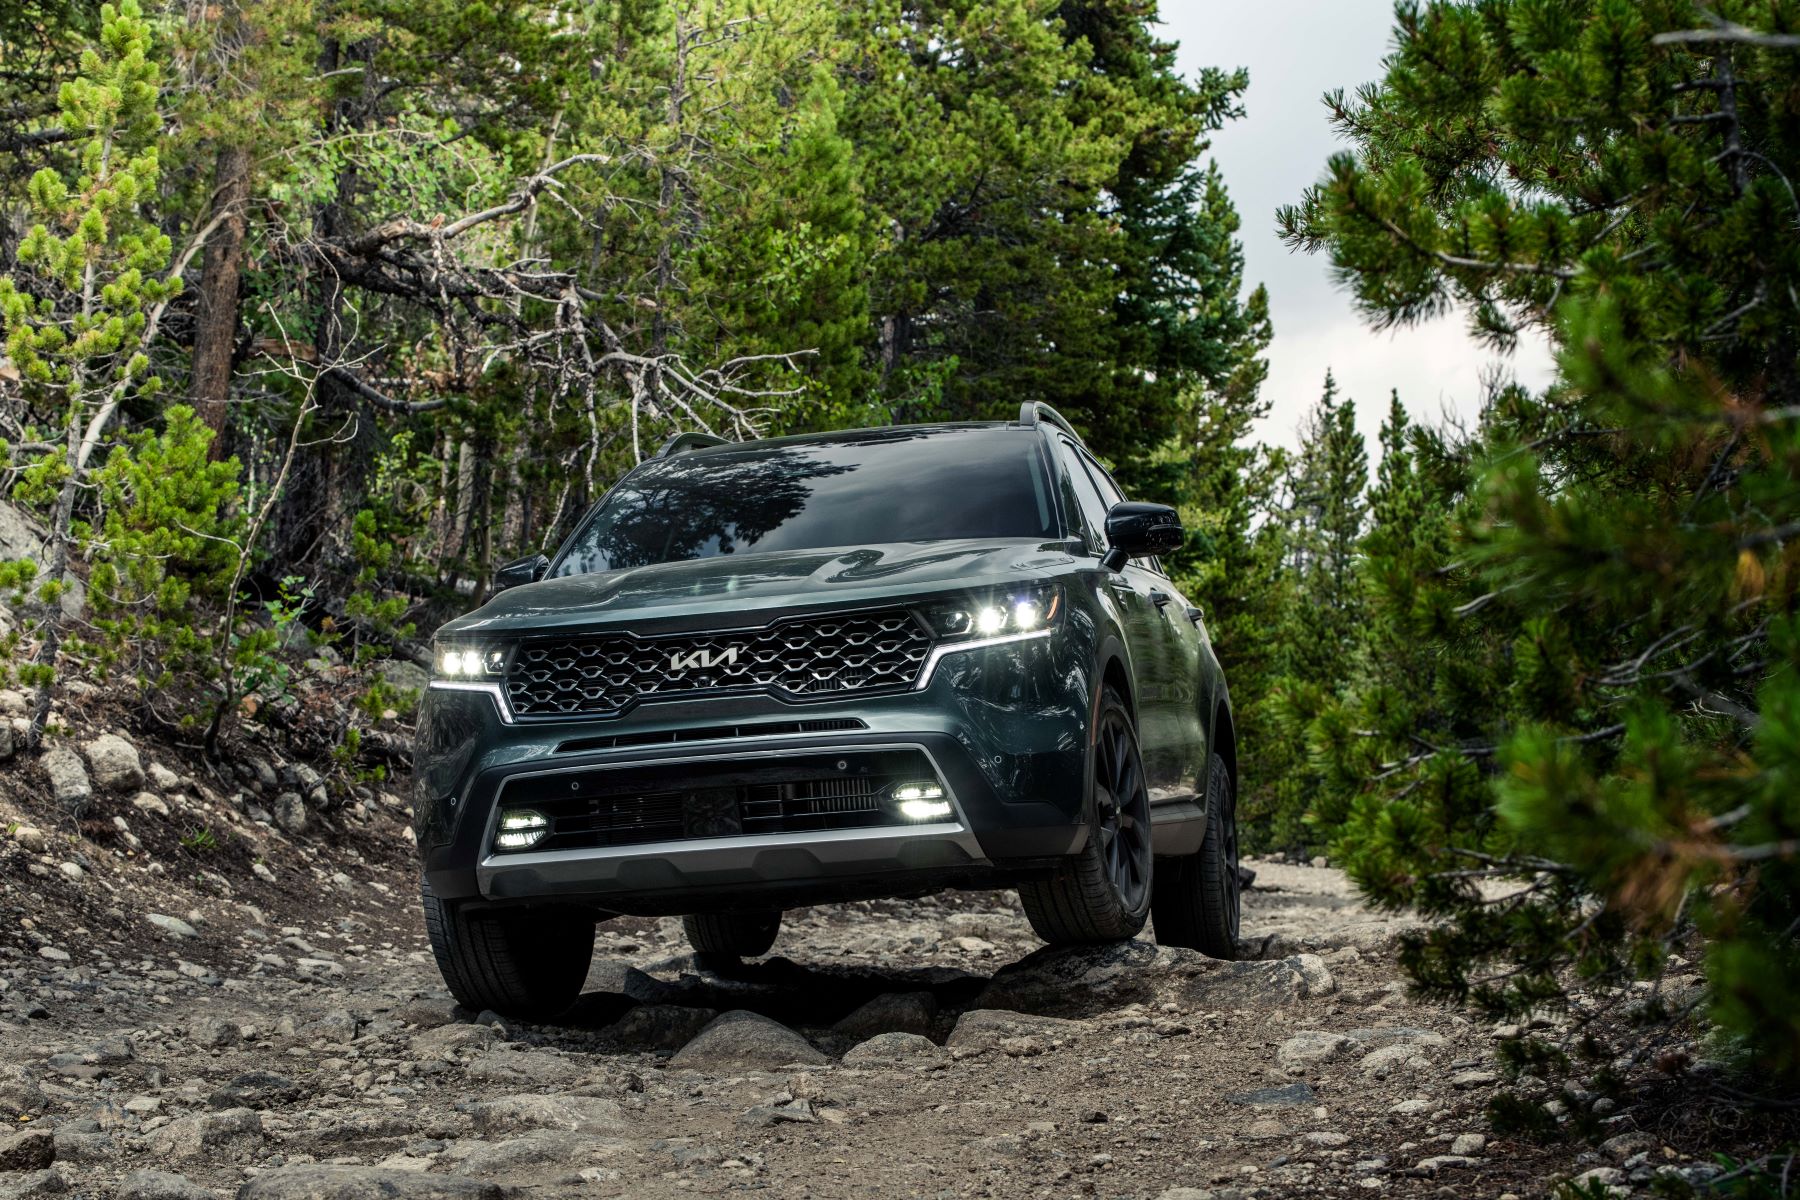 A green 2022 Kia Sorento X-Line midsize SUV model traveling off-road on a rocky gravel trail through a forest